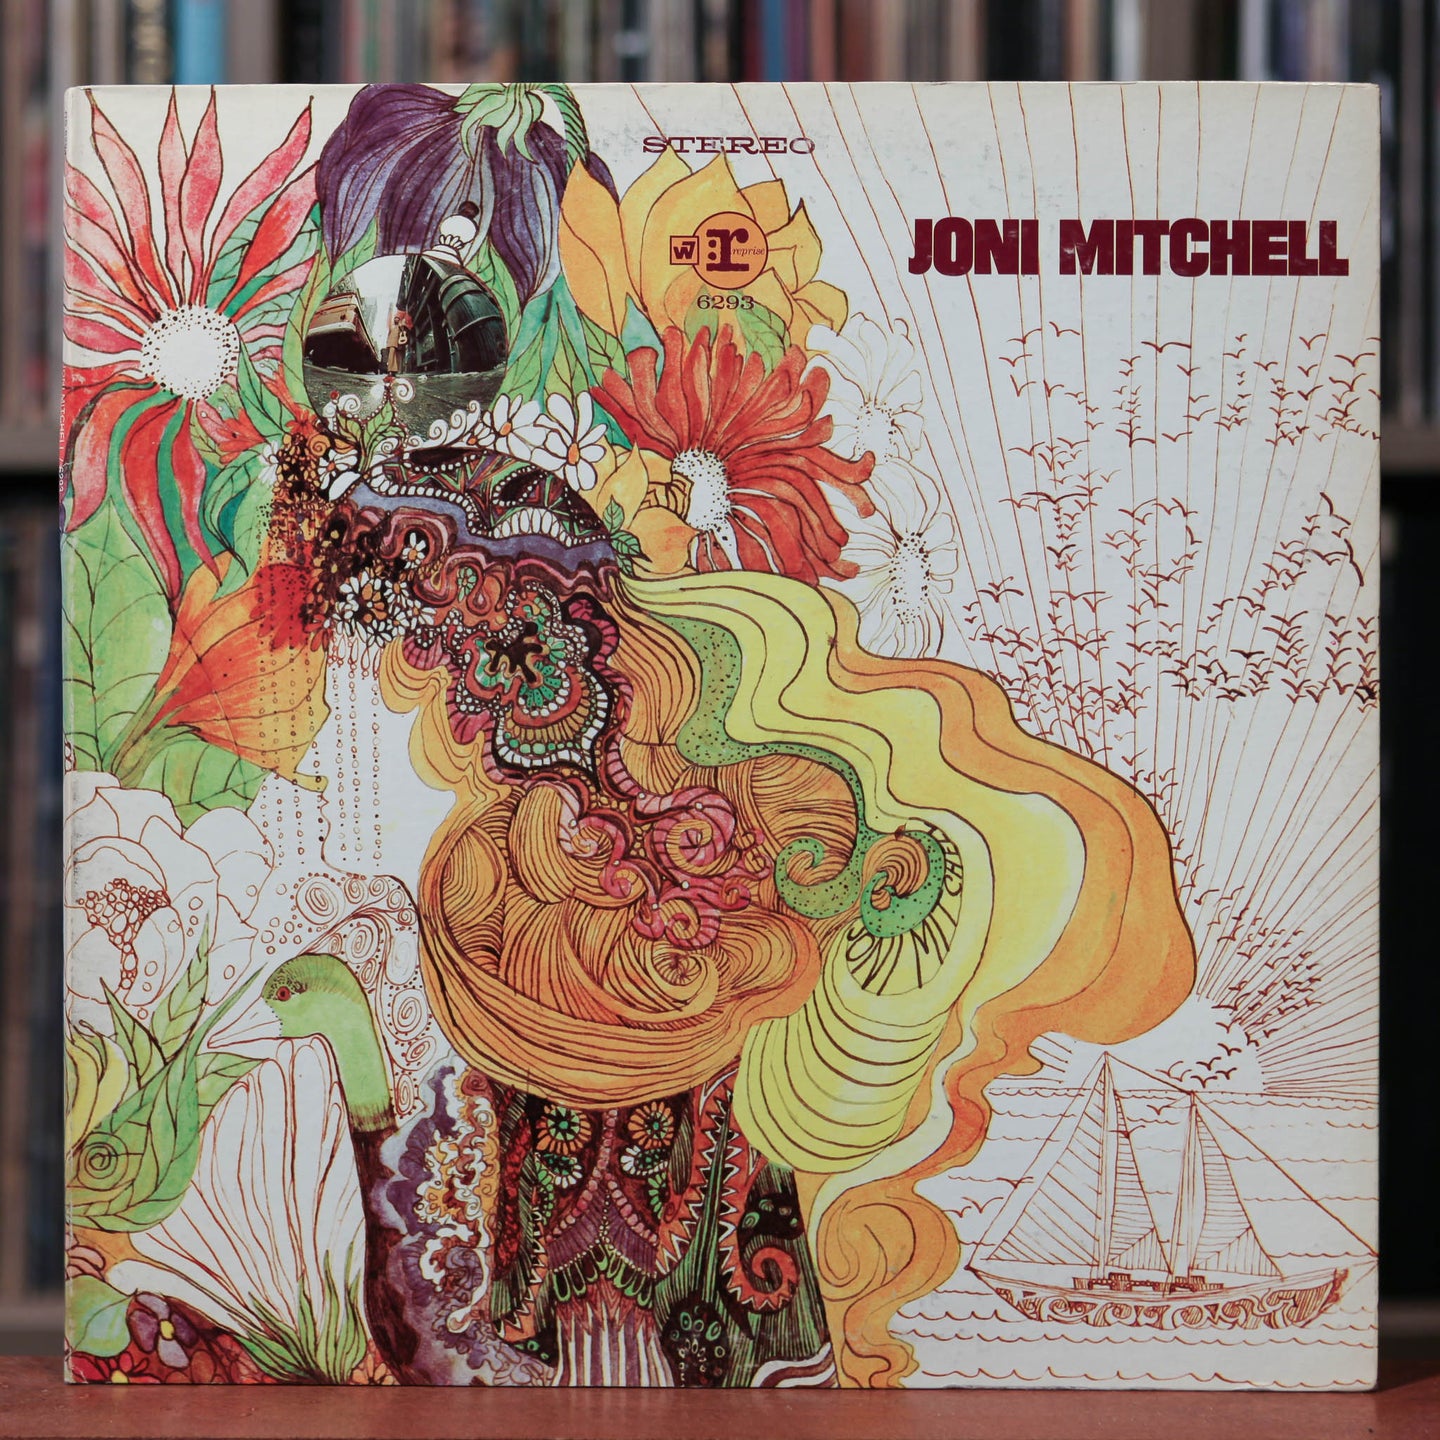 Joni Mitchell - Song to a Seagull - 1970 Reprise, VG+/VG+